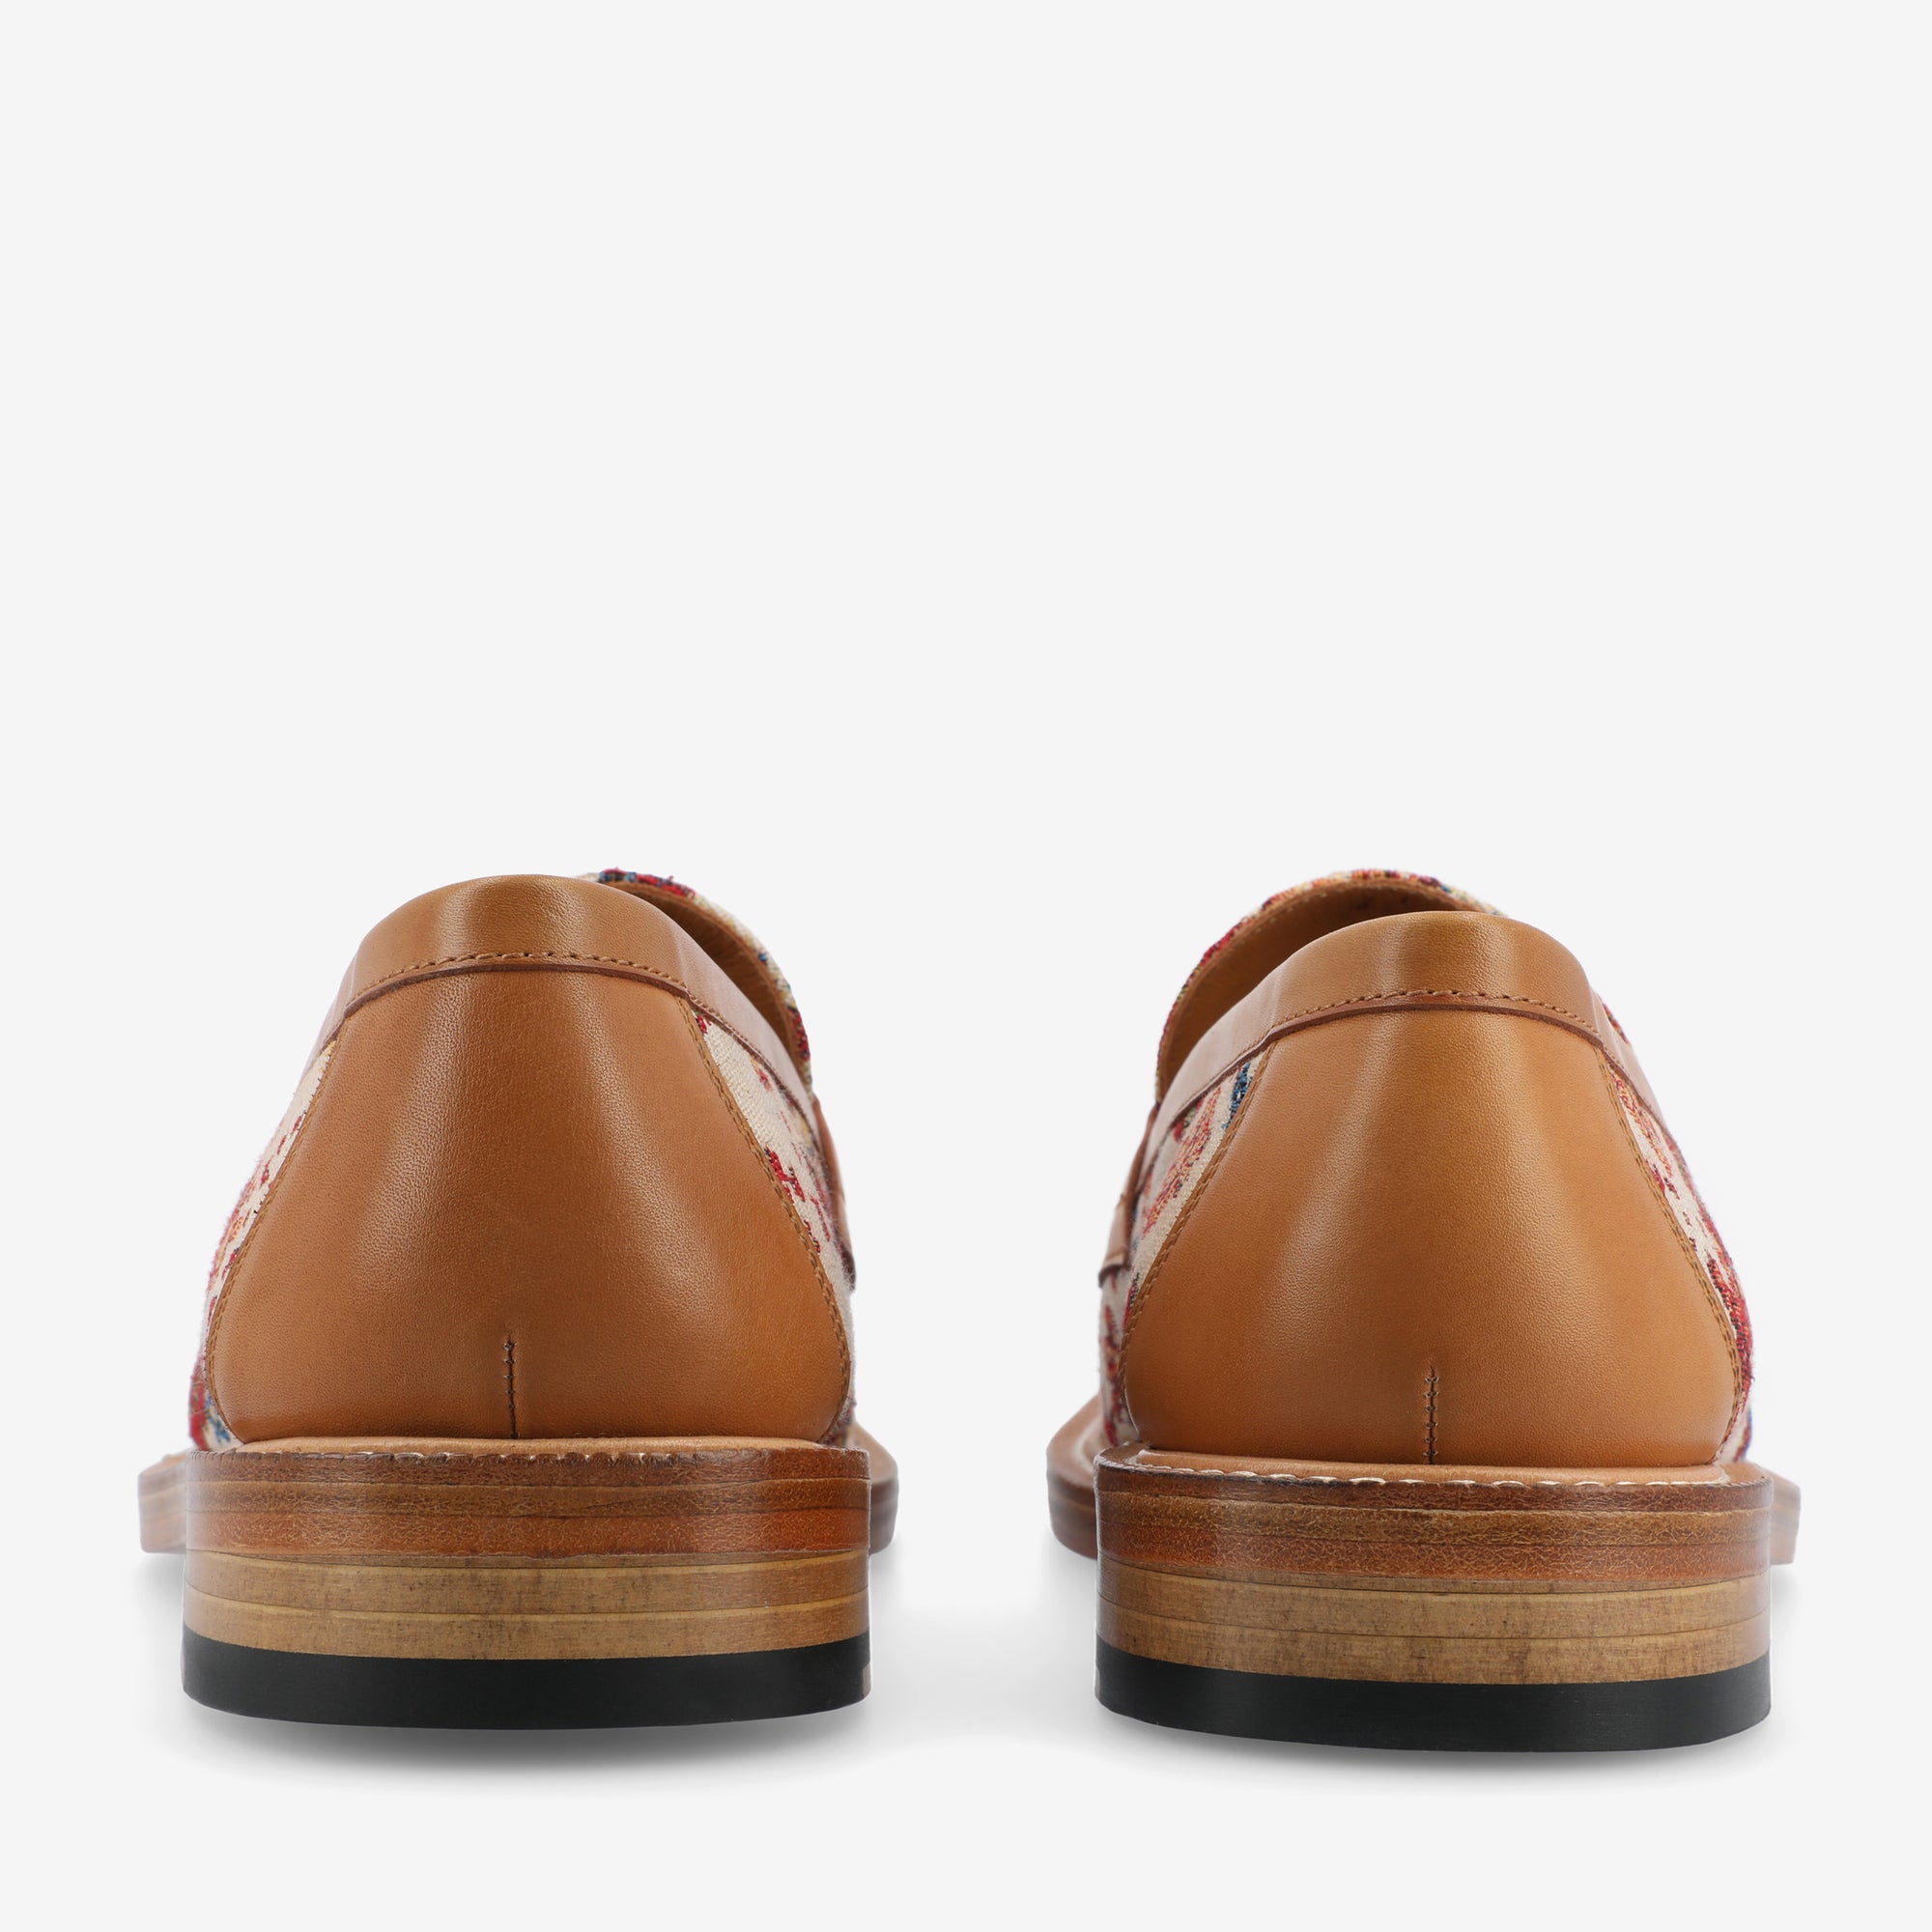 The Fitz Loafer in Florence